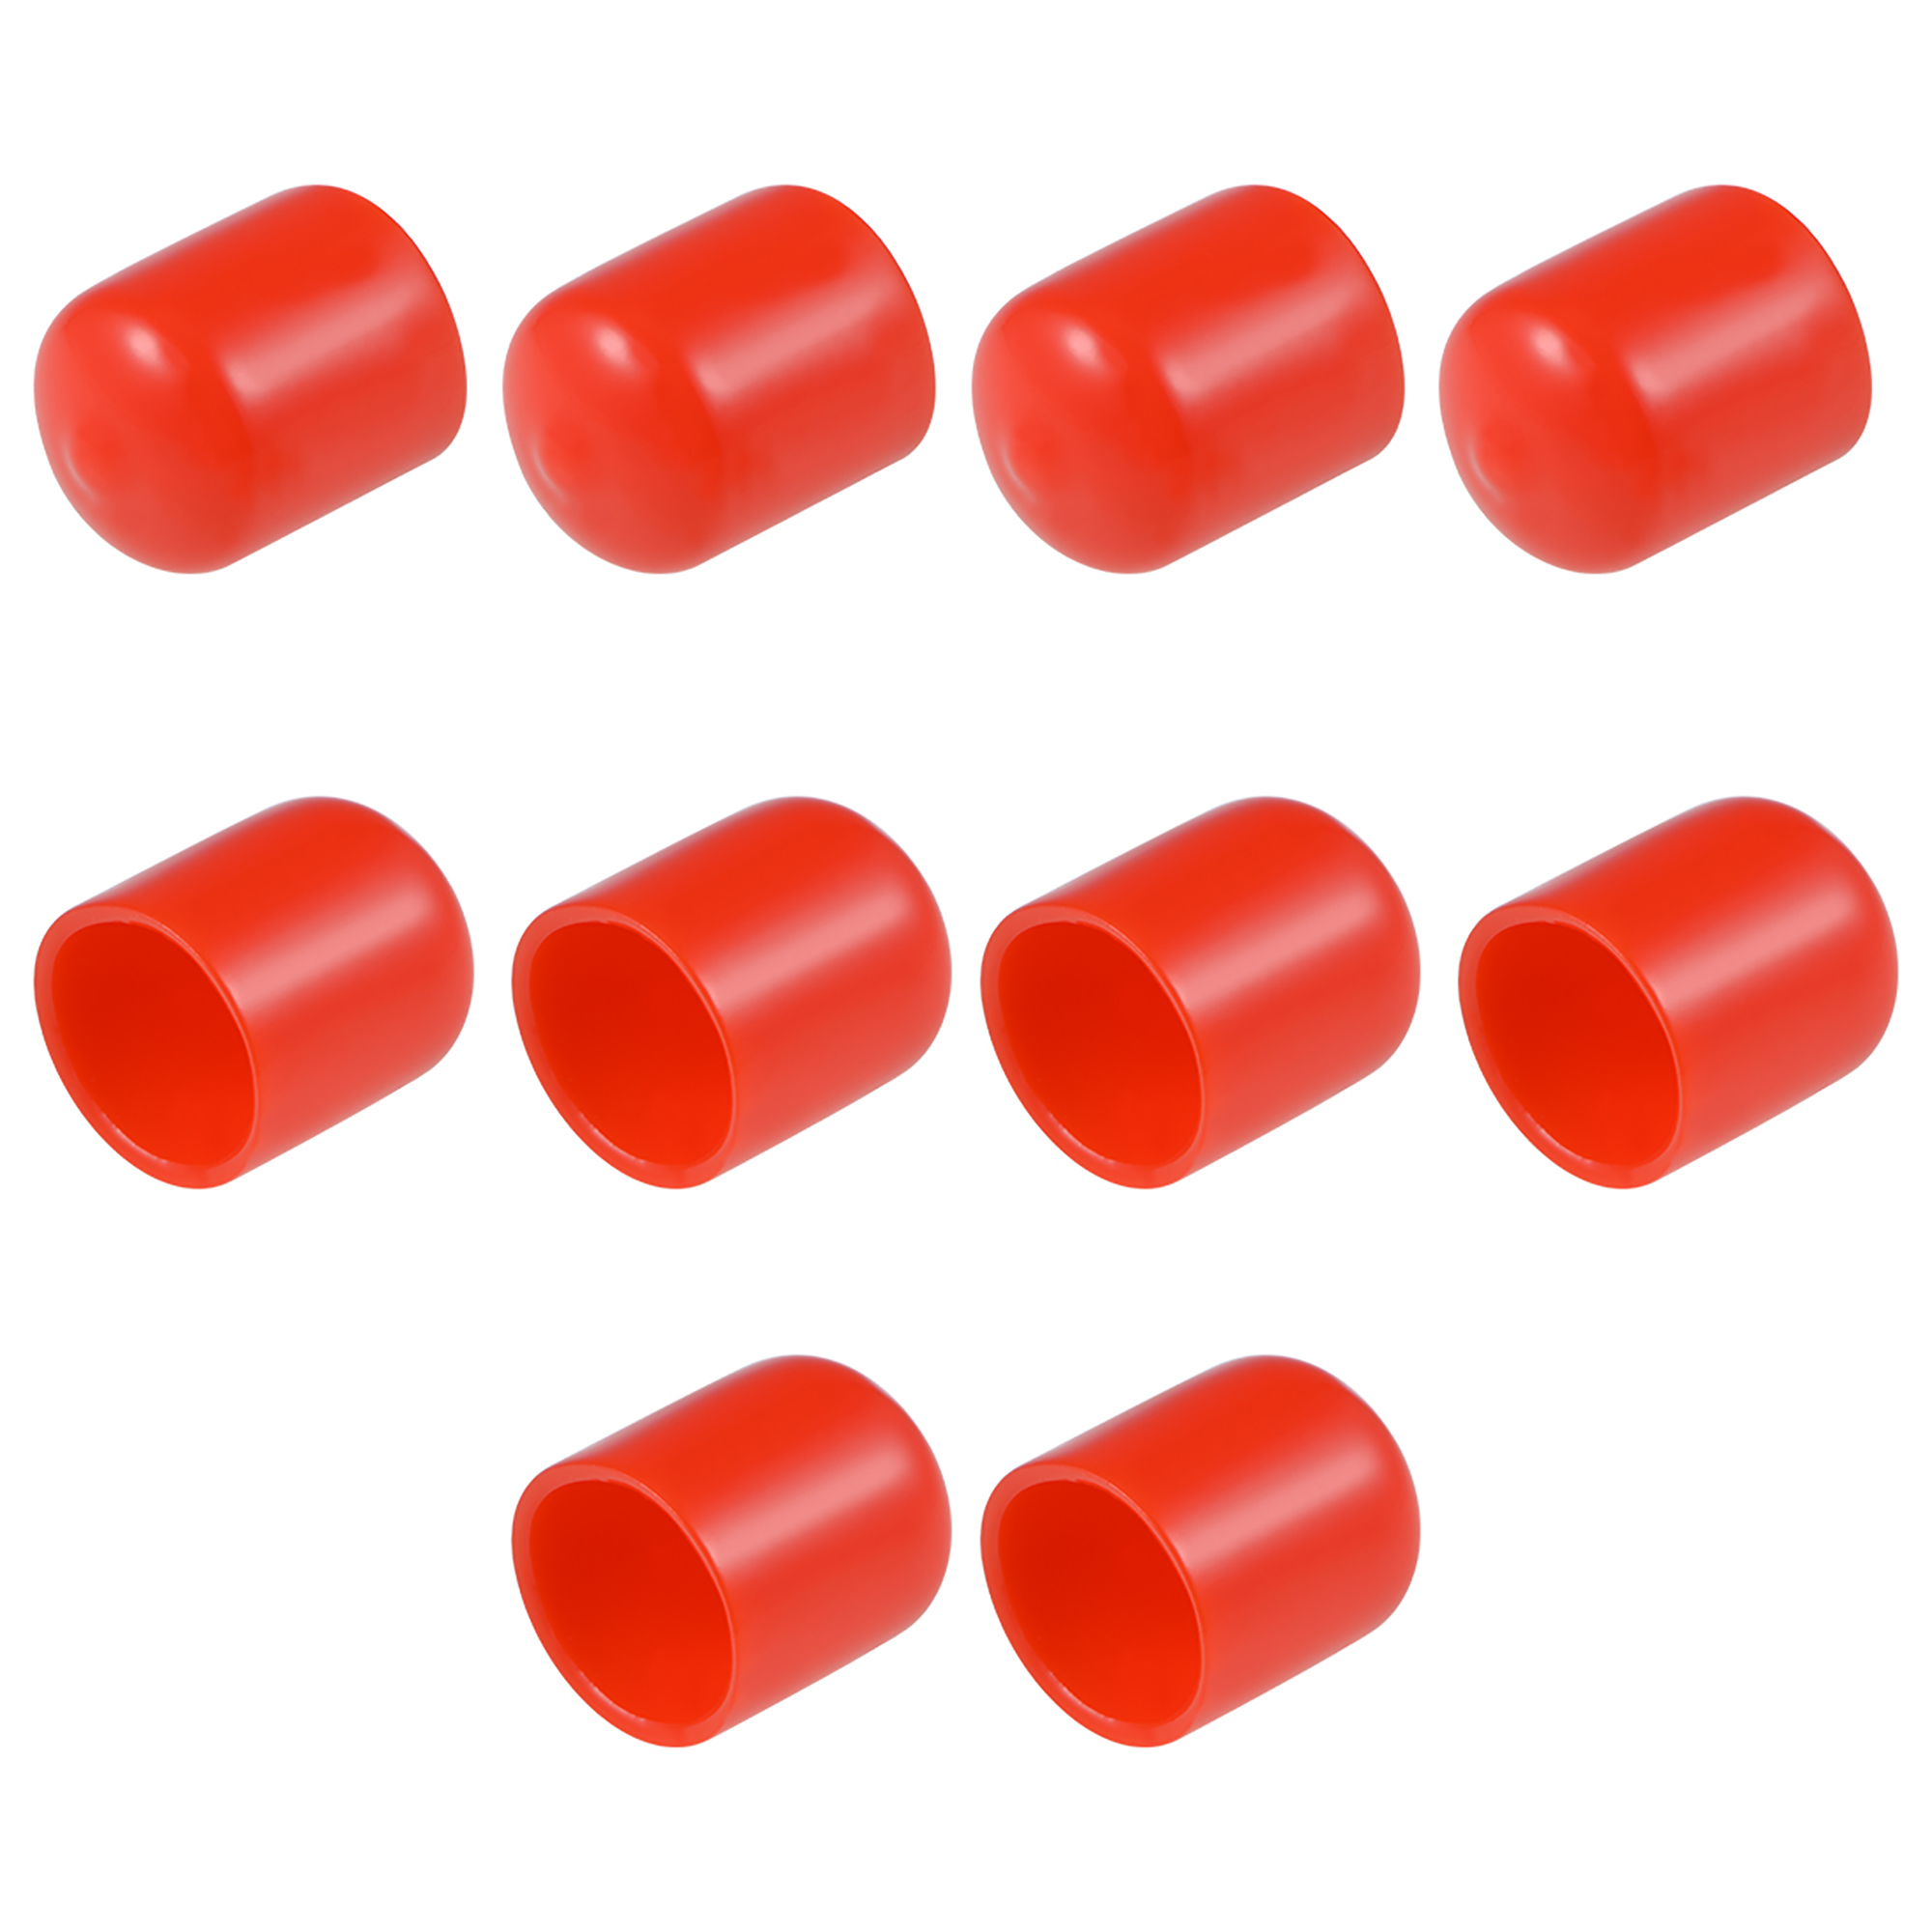 uxcell Rubber End Caps 3/4-inch ID Round End Cap Cover Red Screw Thread Protectors 20pcs 